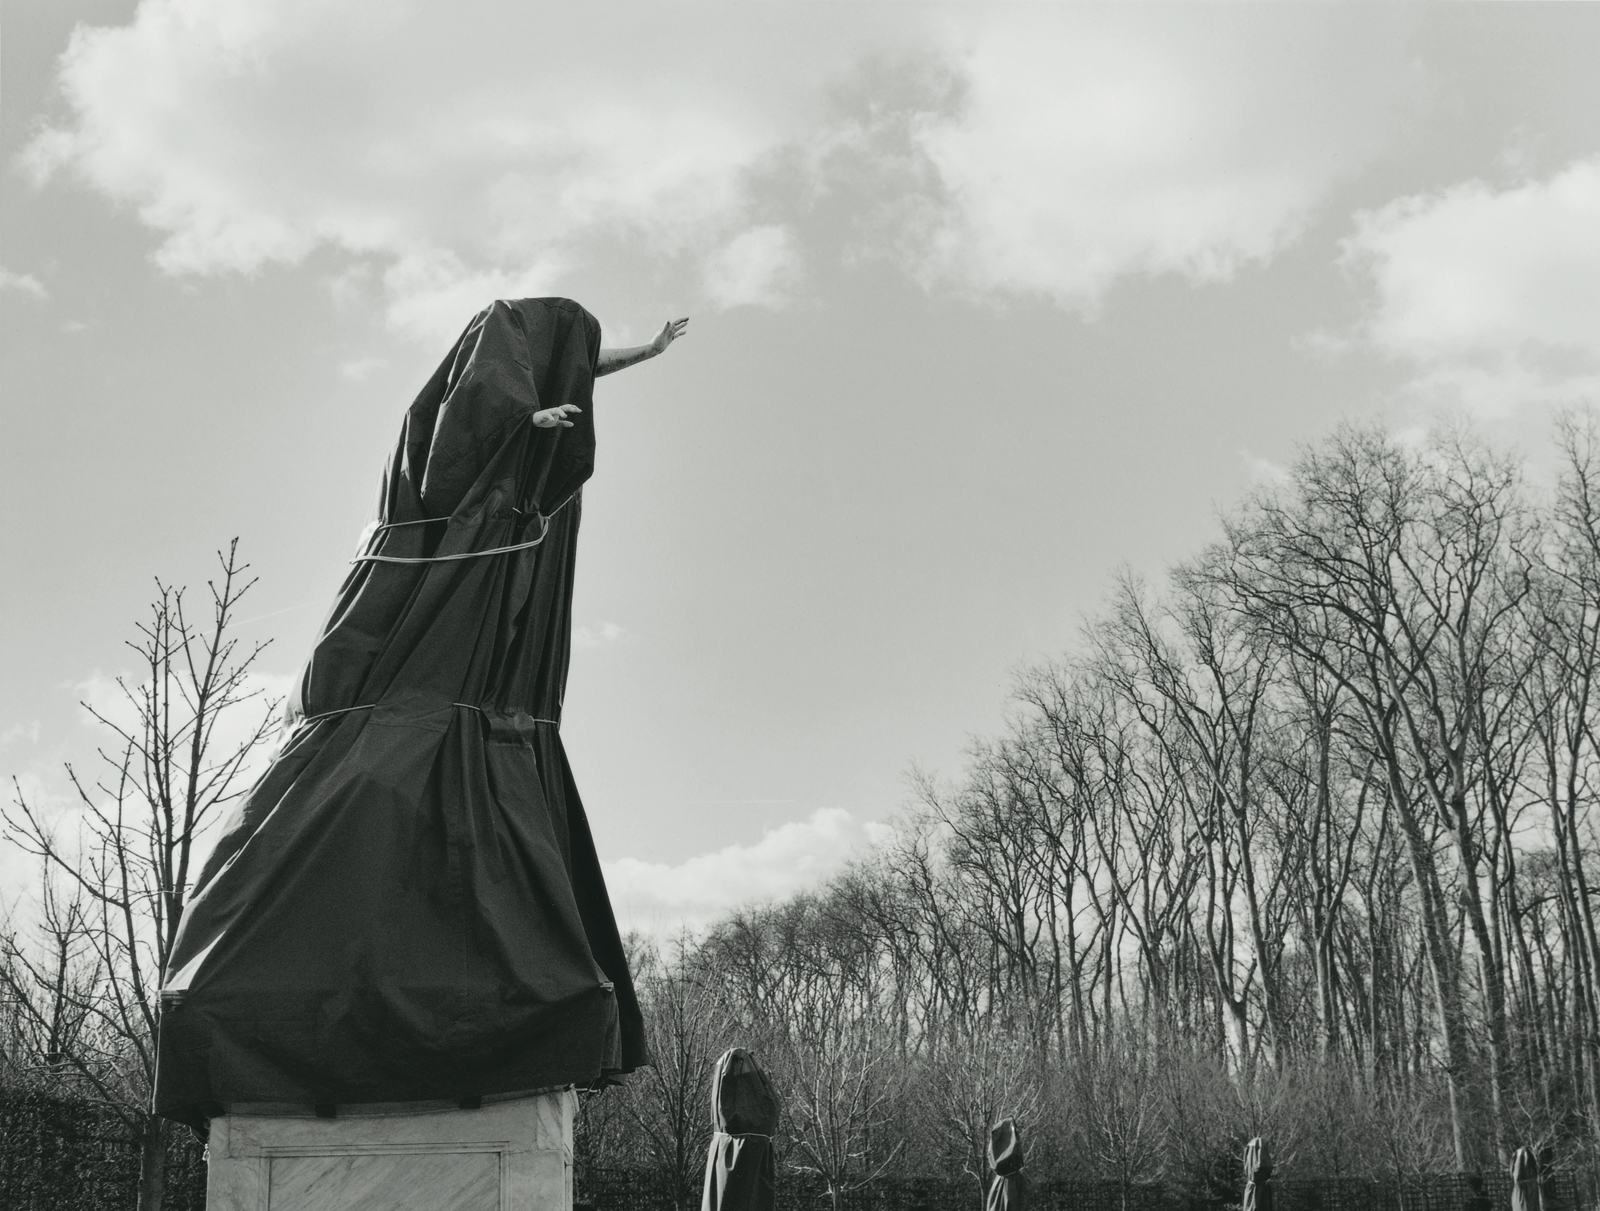 A 2001 photograph by artist Ann Burke Daly from her series “Anti-Monuments” depicting a sculpture in the gardens of Versailles covered with a tarp.